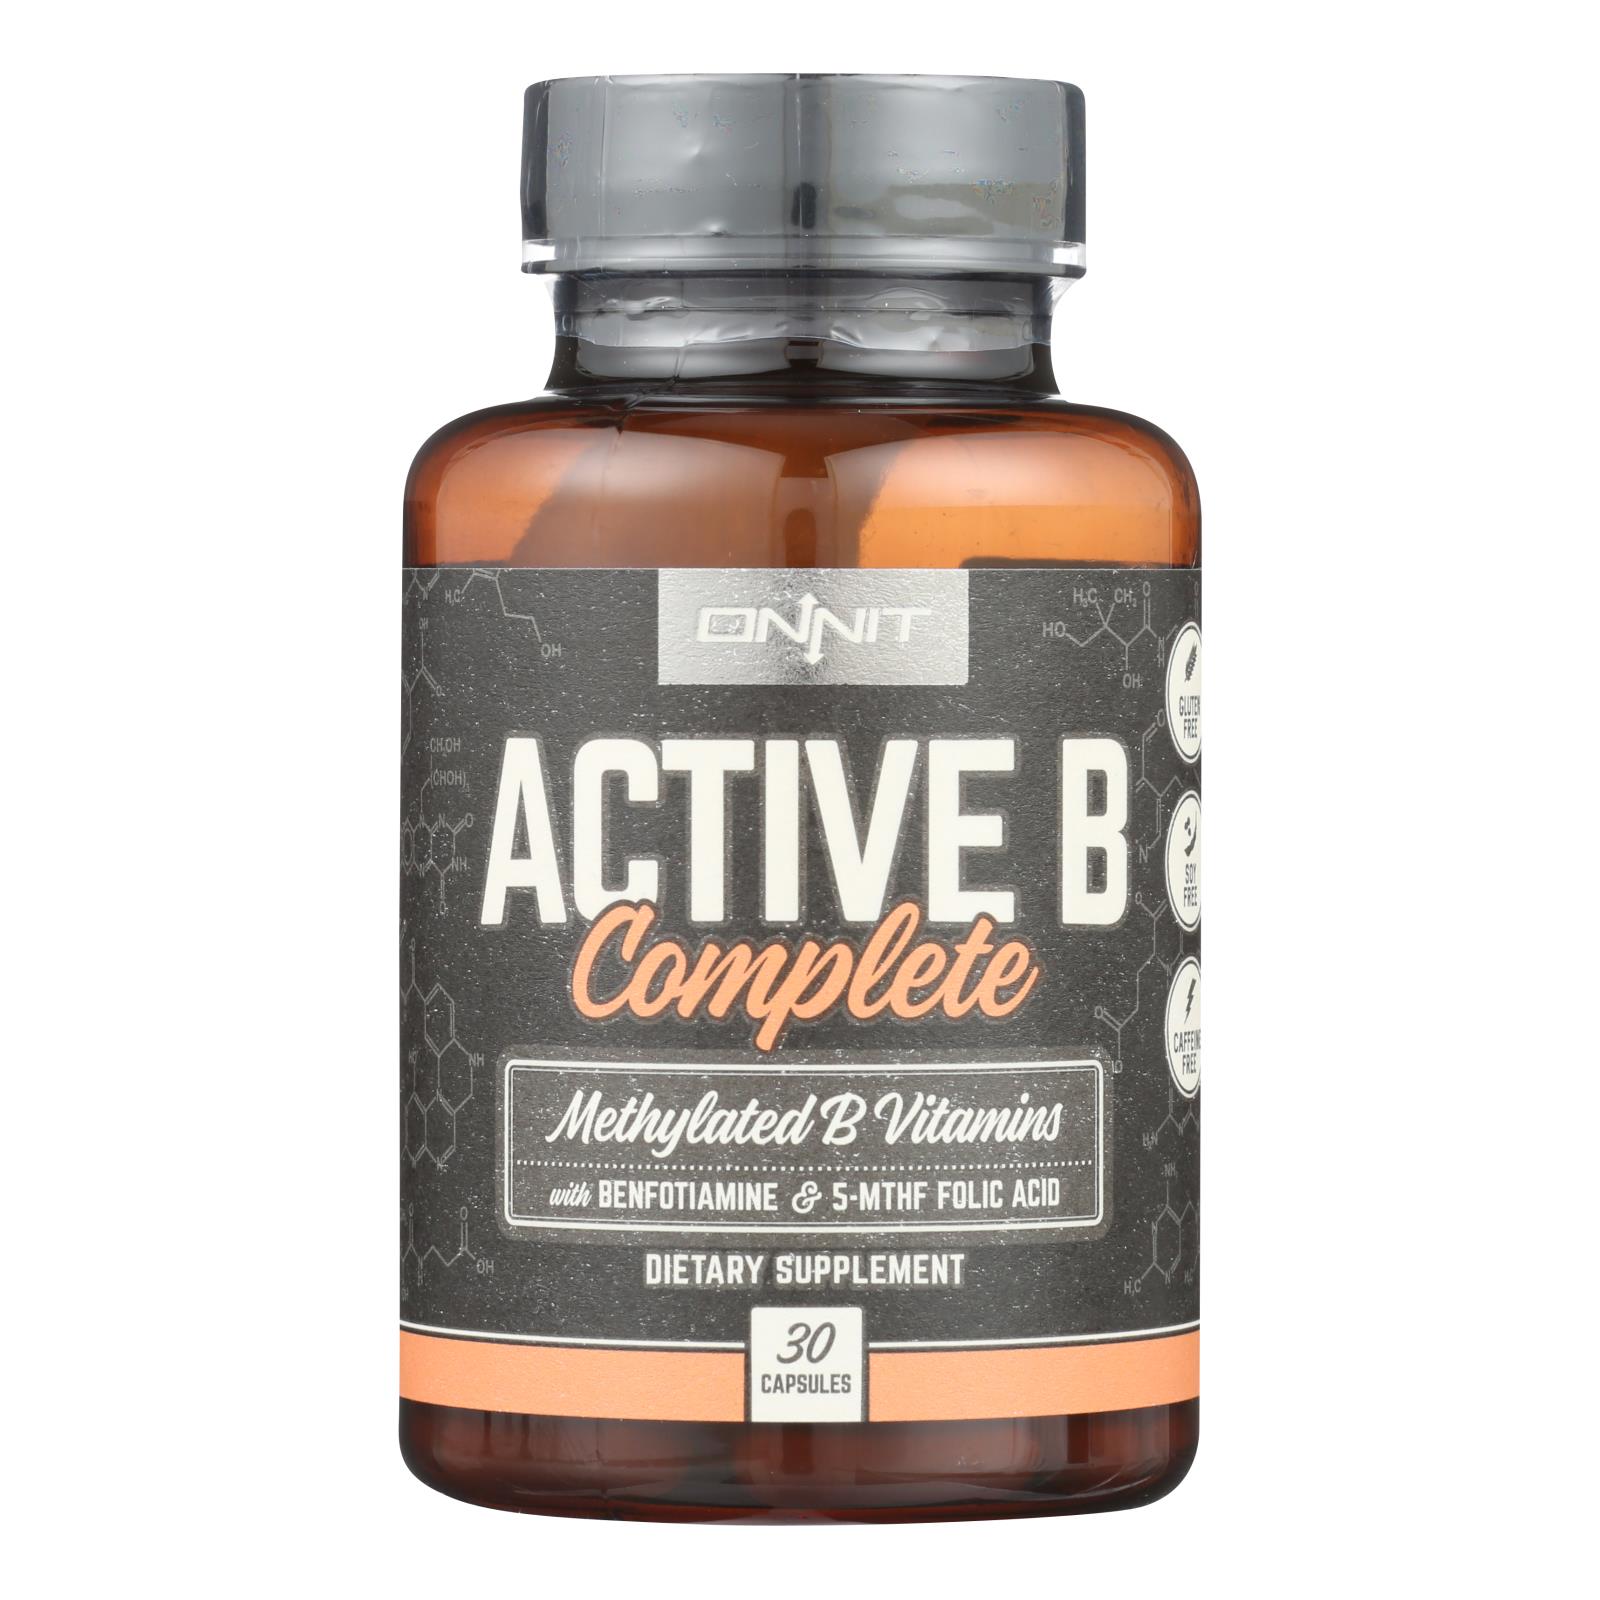 Onnit Labs - Vitamin Active B Complex - 1 Each - 30 CT